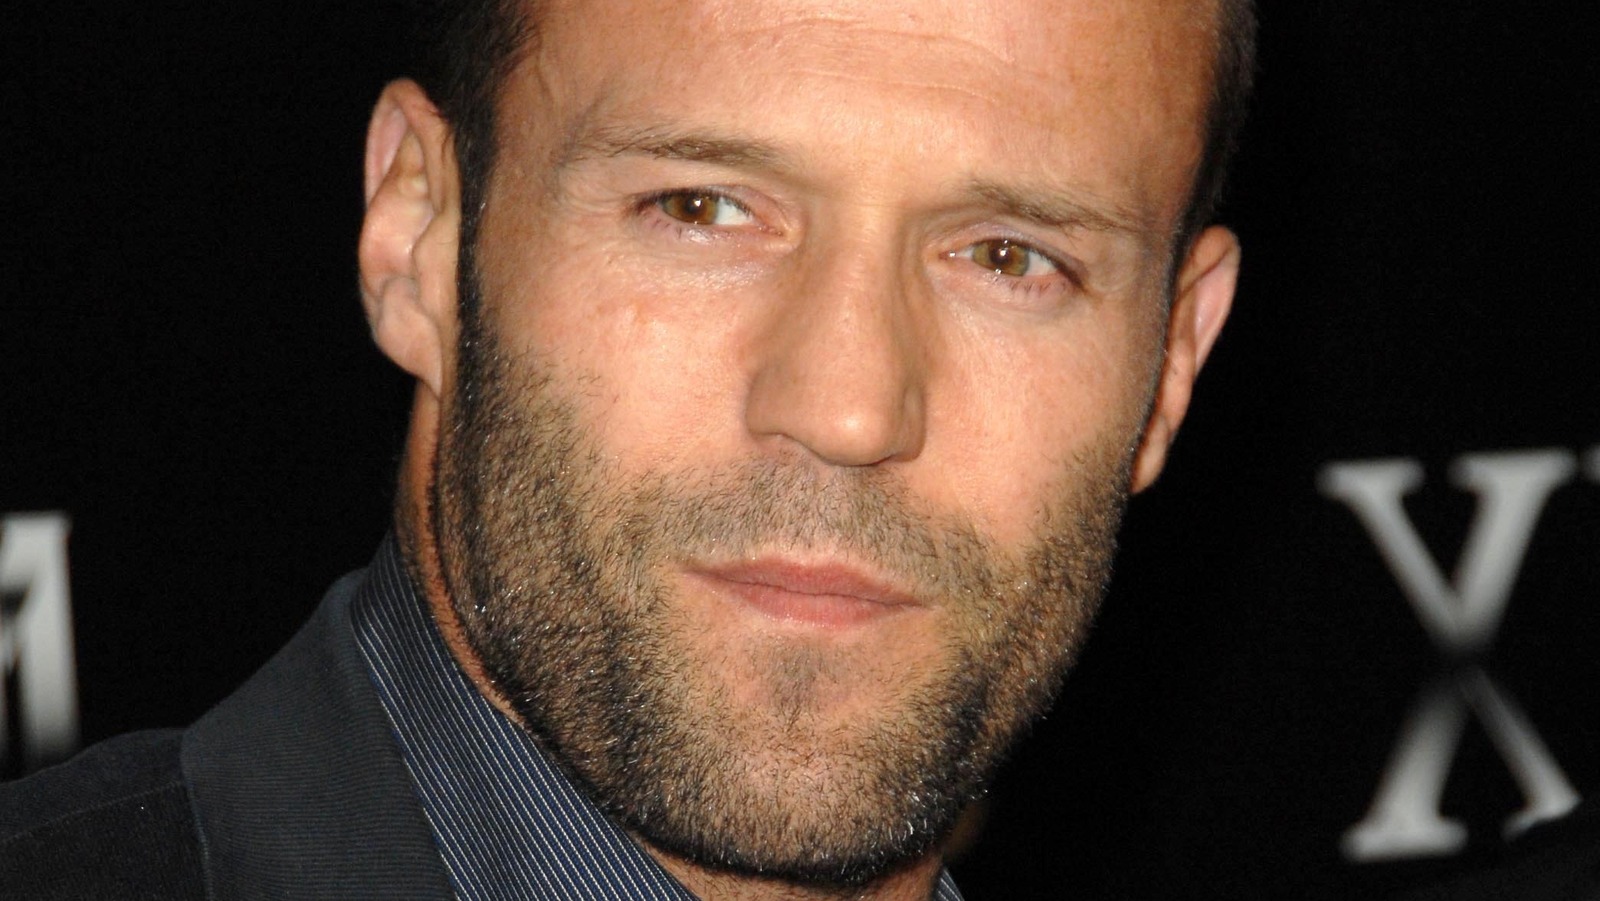 The Transformation Of Jason Statham From Childhood To 54 Years Old